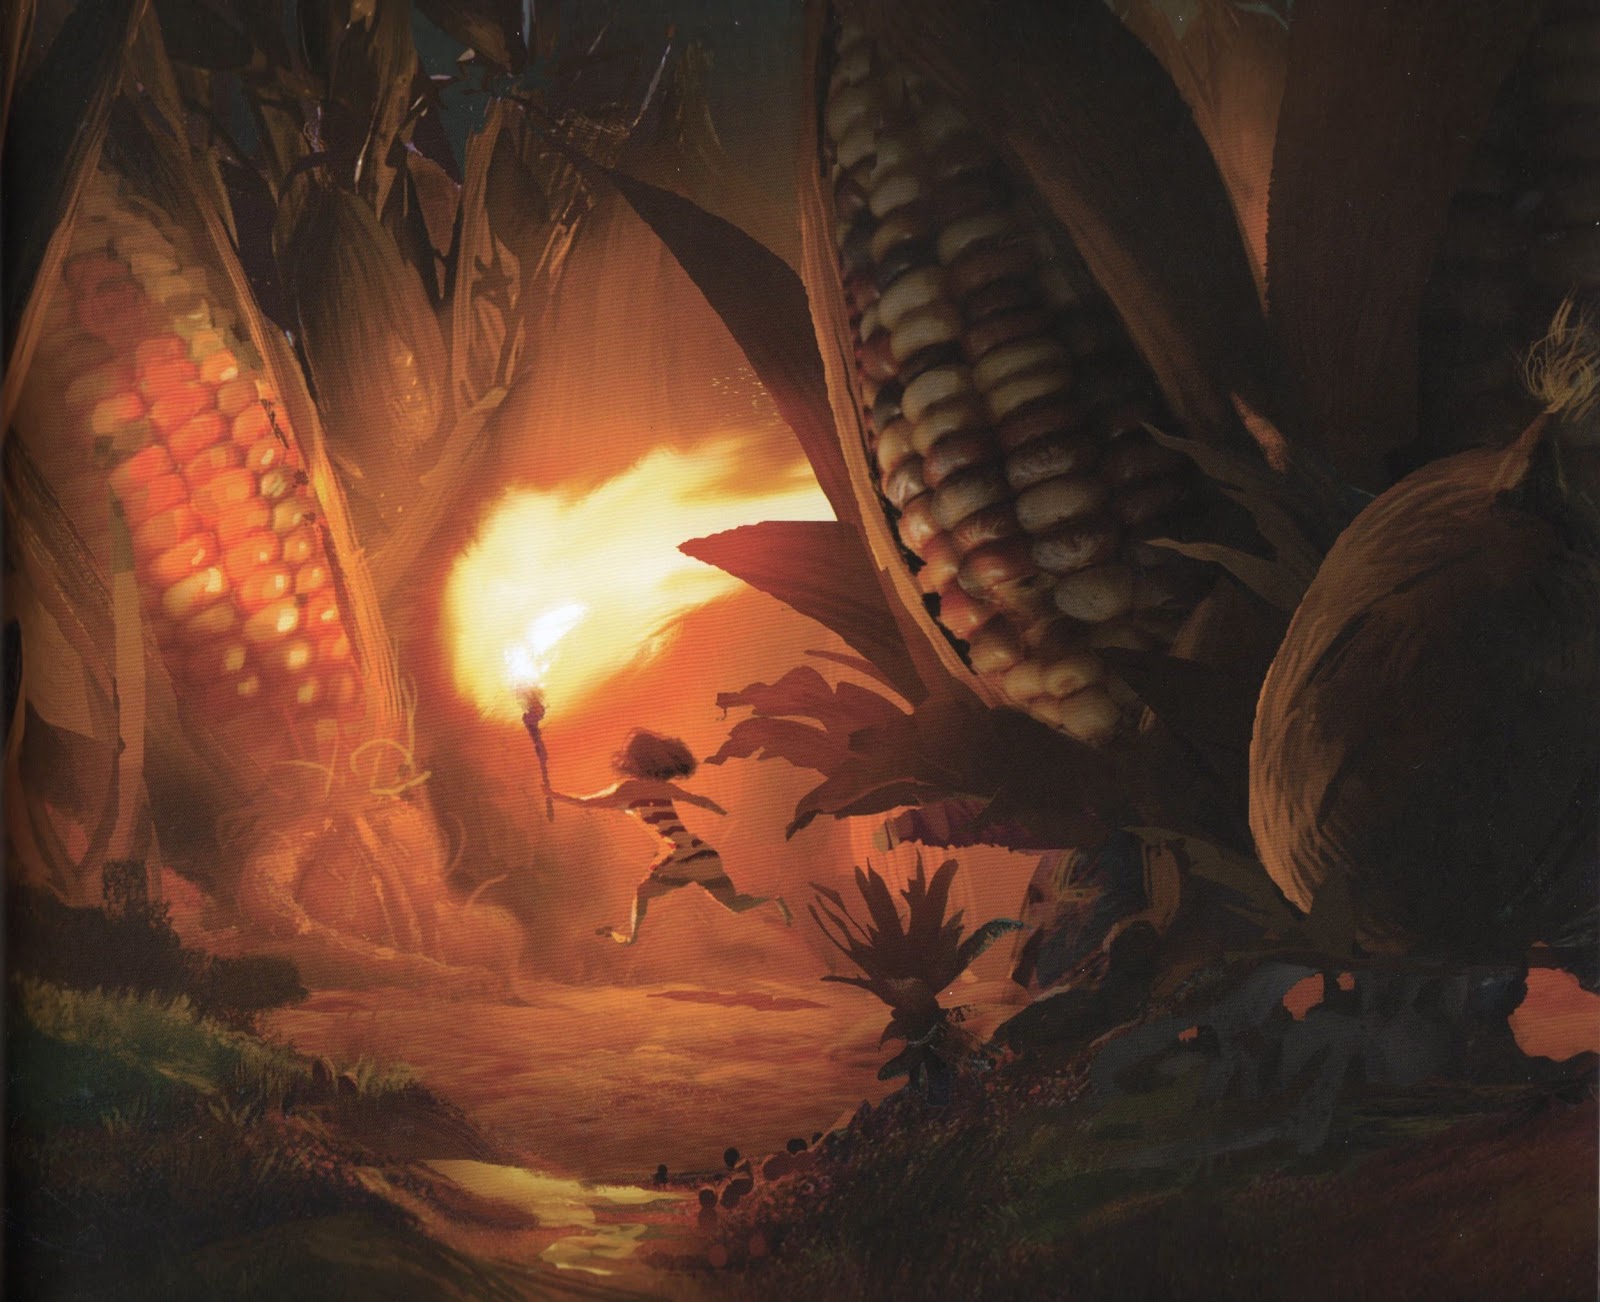 The Art of The Croods